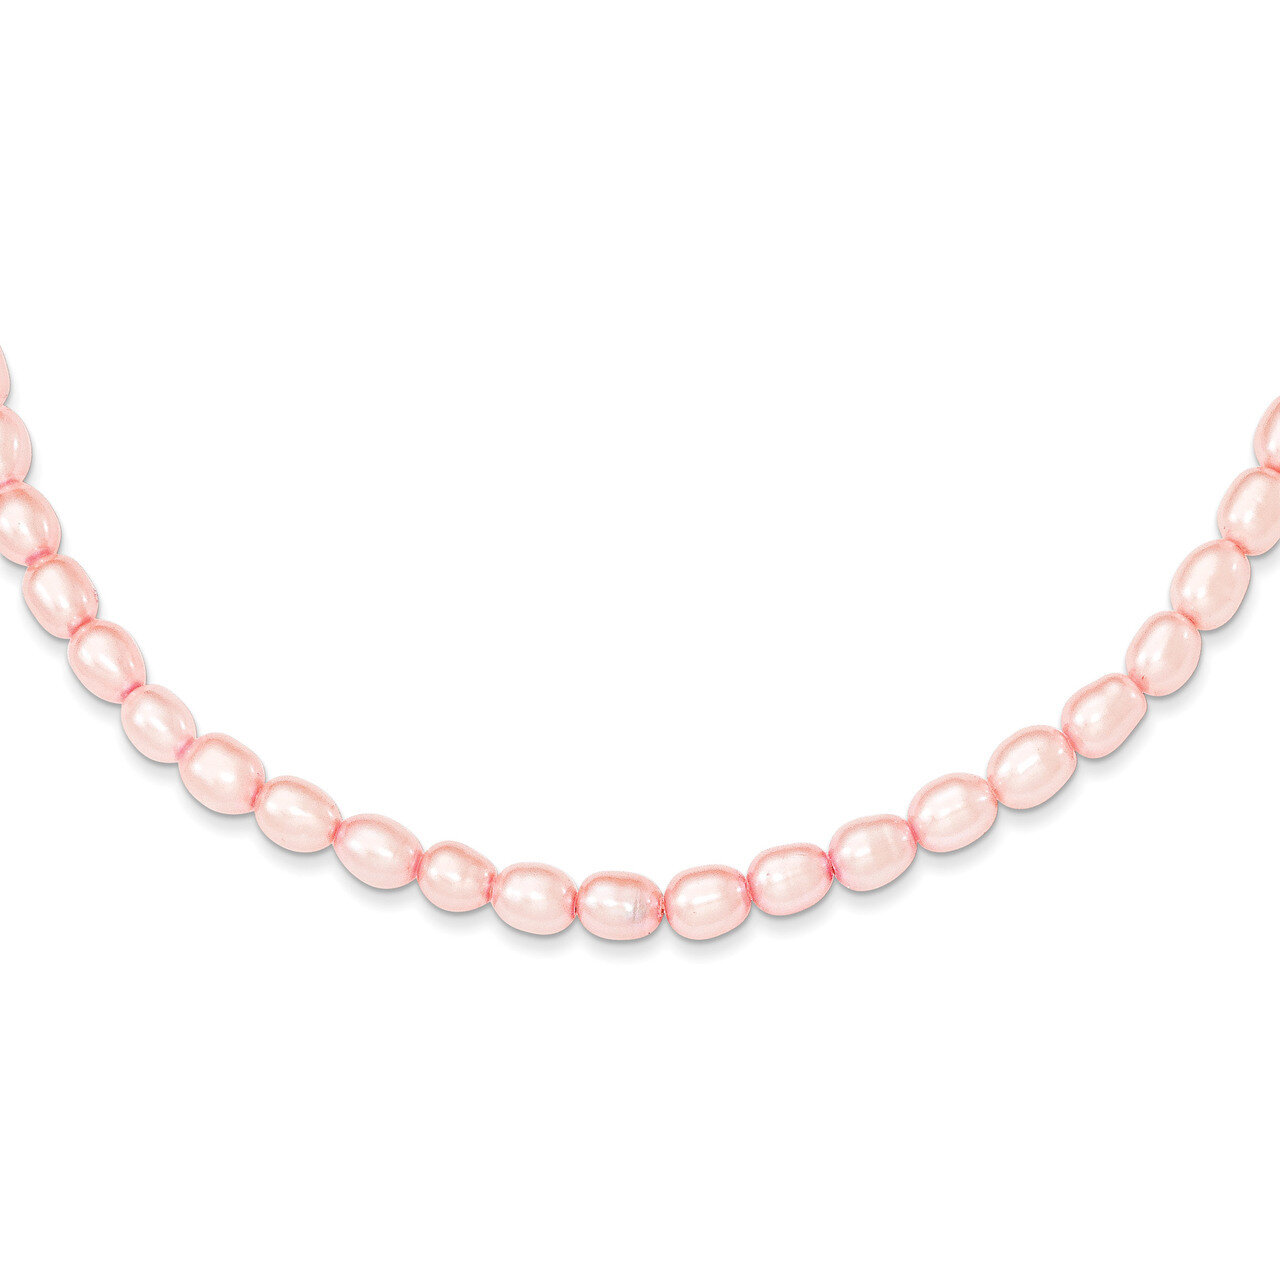 Pink 4-4.5mm Freshwater Cultured Pearl Necklace 13 Inch Sterling Silver QH5280-13